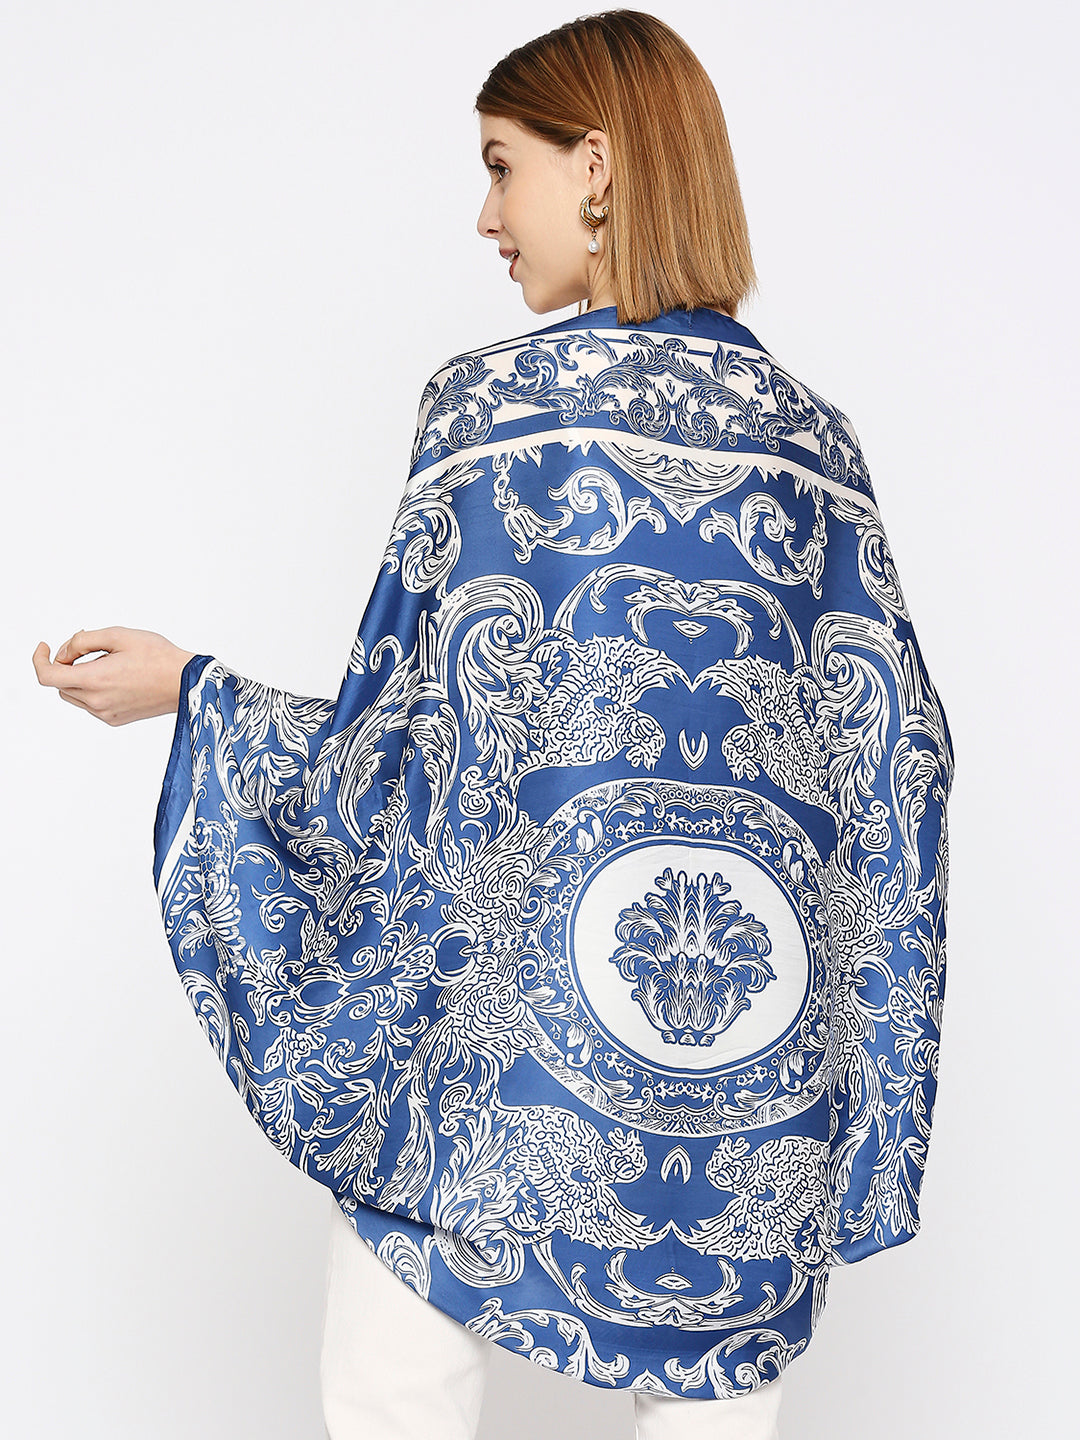 Blue And White Ethnic Printed Cape